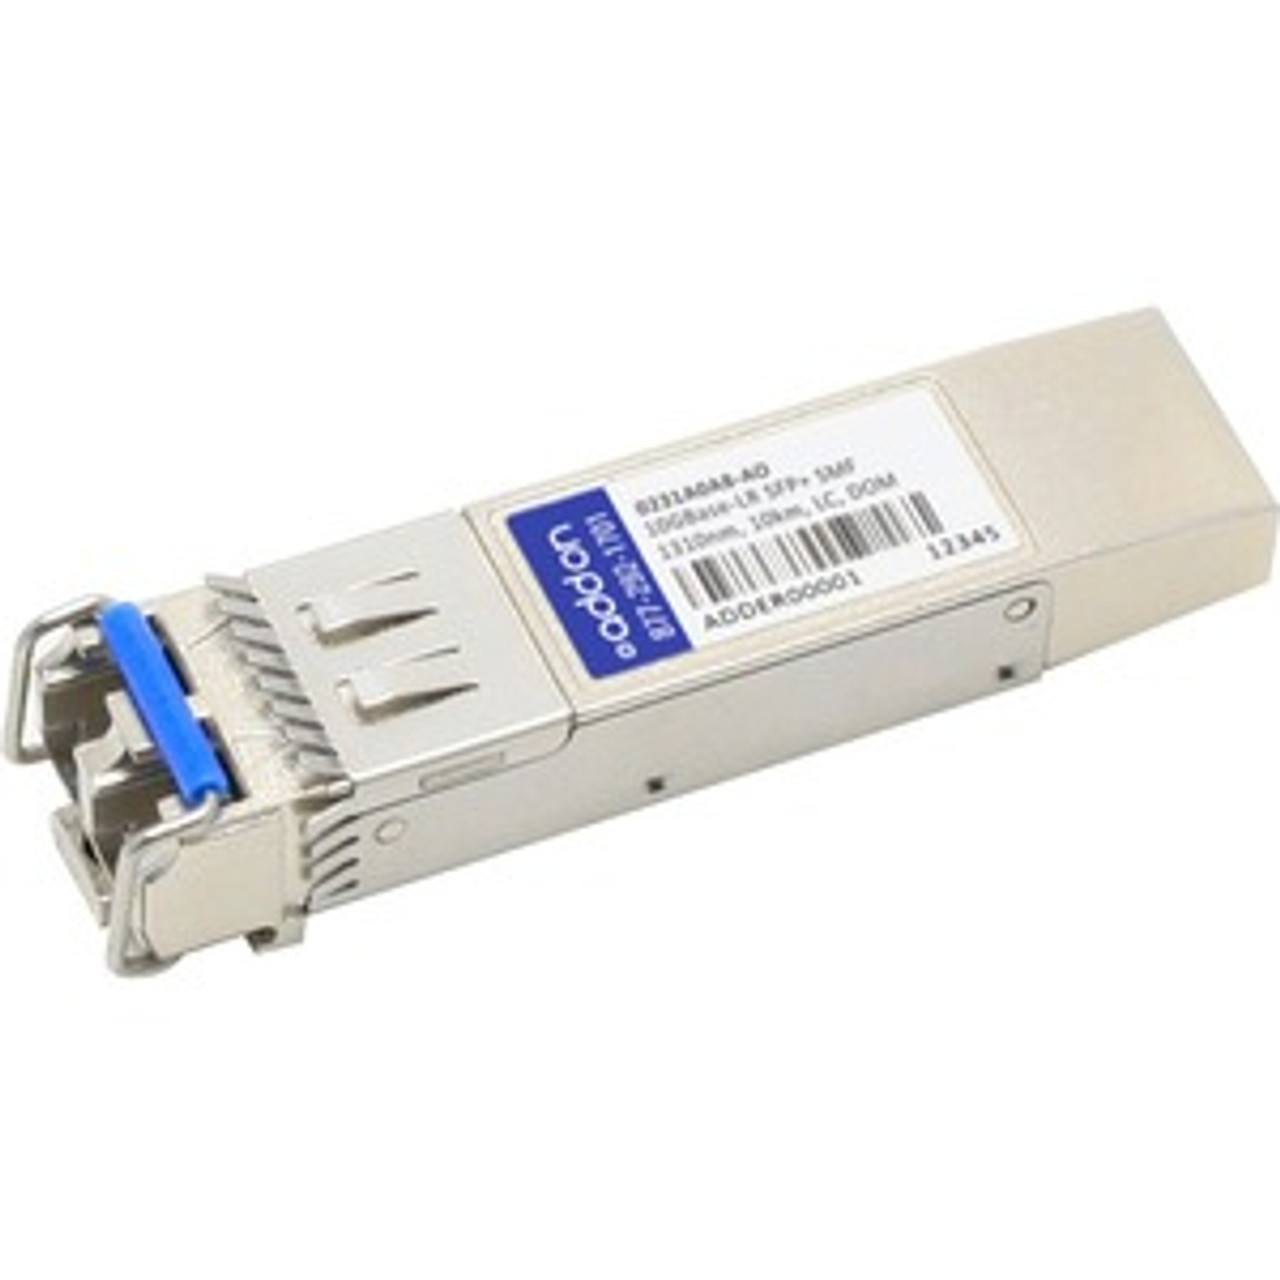 0231A0A8-AO AddOn 10Gbps 10GBase-LR Single-mode Fiber 10km 1310nm Duplex LC Connector SFP+ Transceiver Module for H3C Compatible